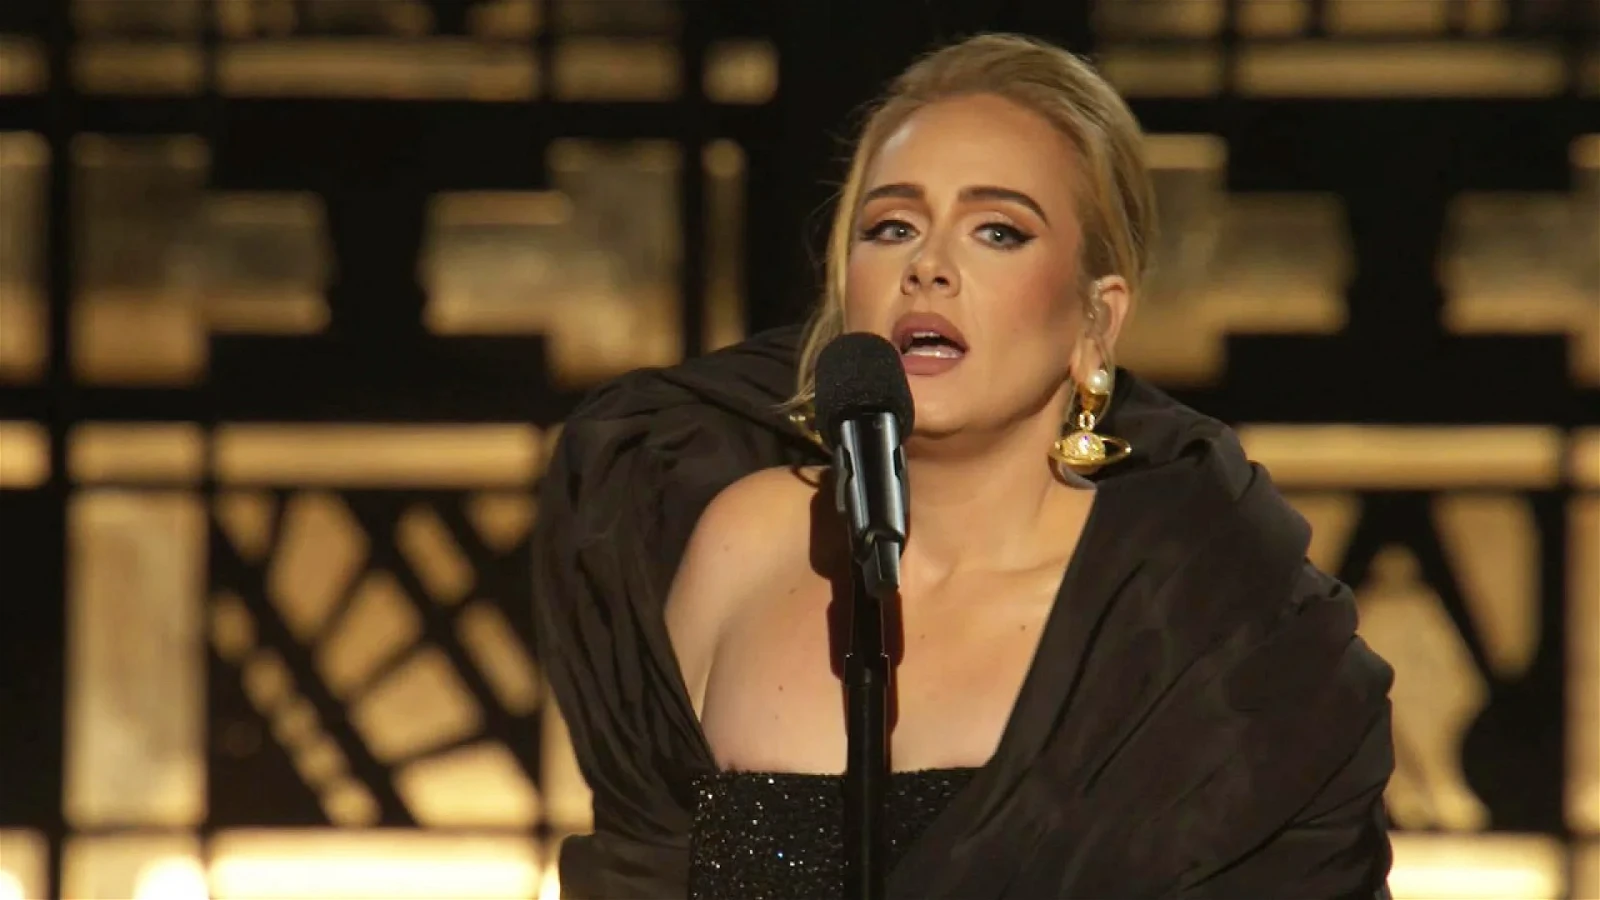 Adele performing Rolling in the Deep during her special One Night Only on CBS